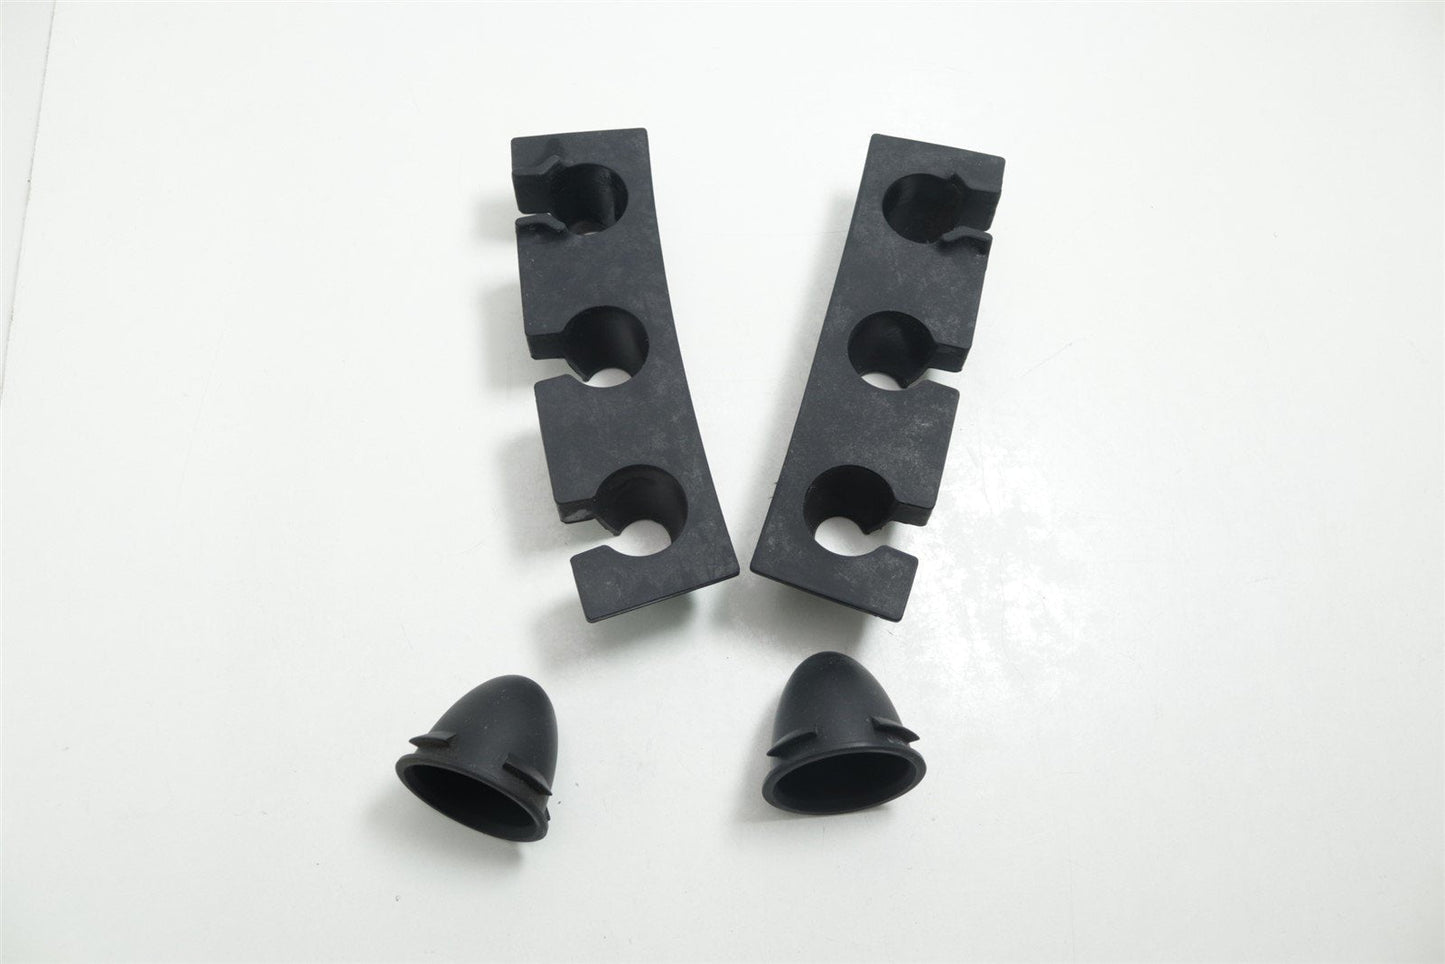 GE HealthCare Vivid S60 Probe Inserts and Gel Cups